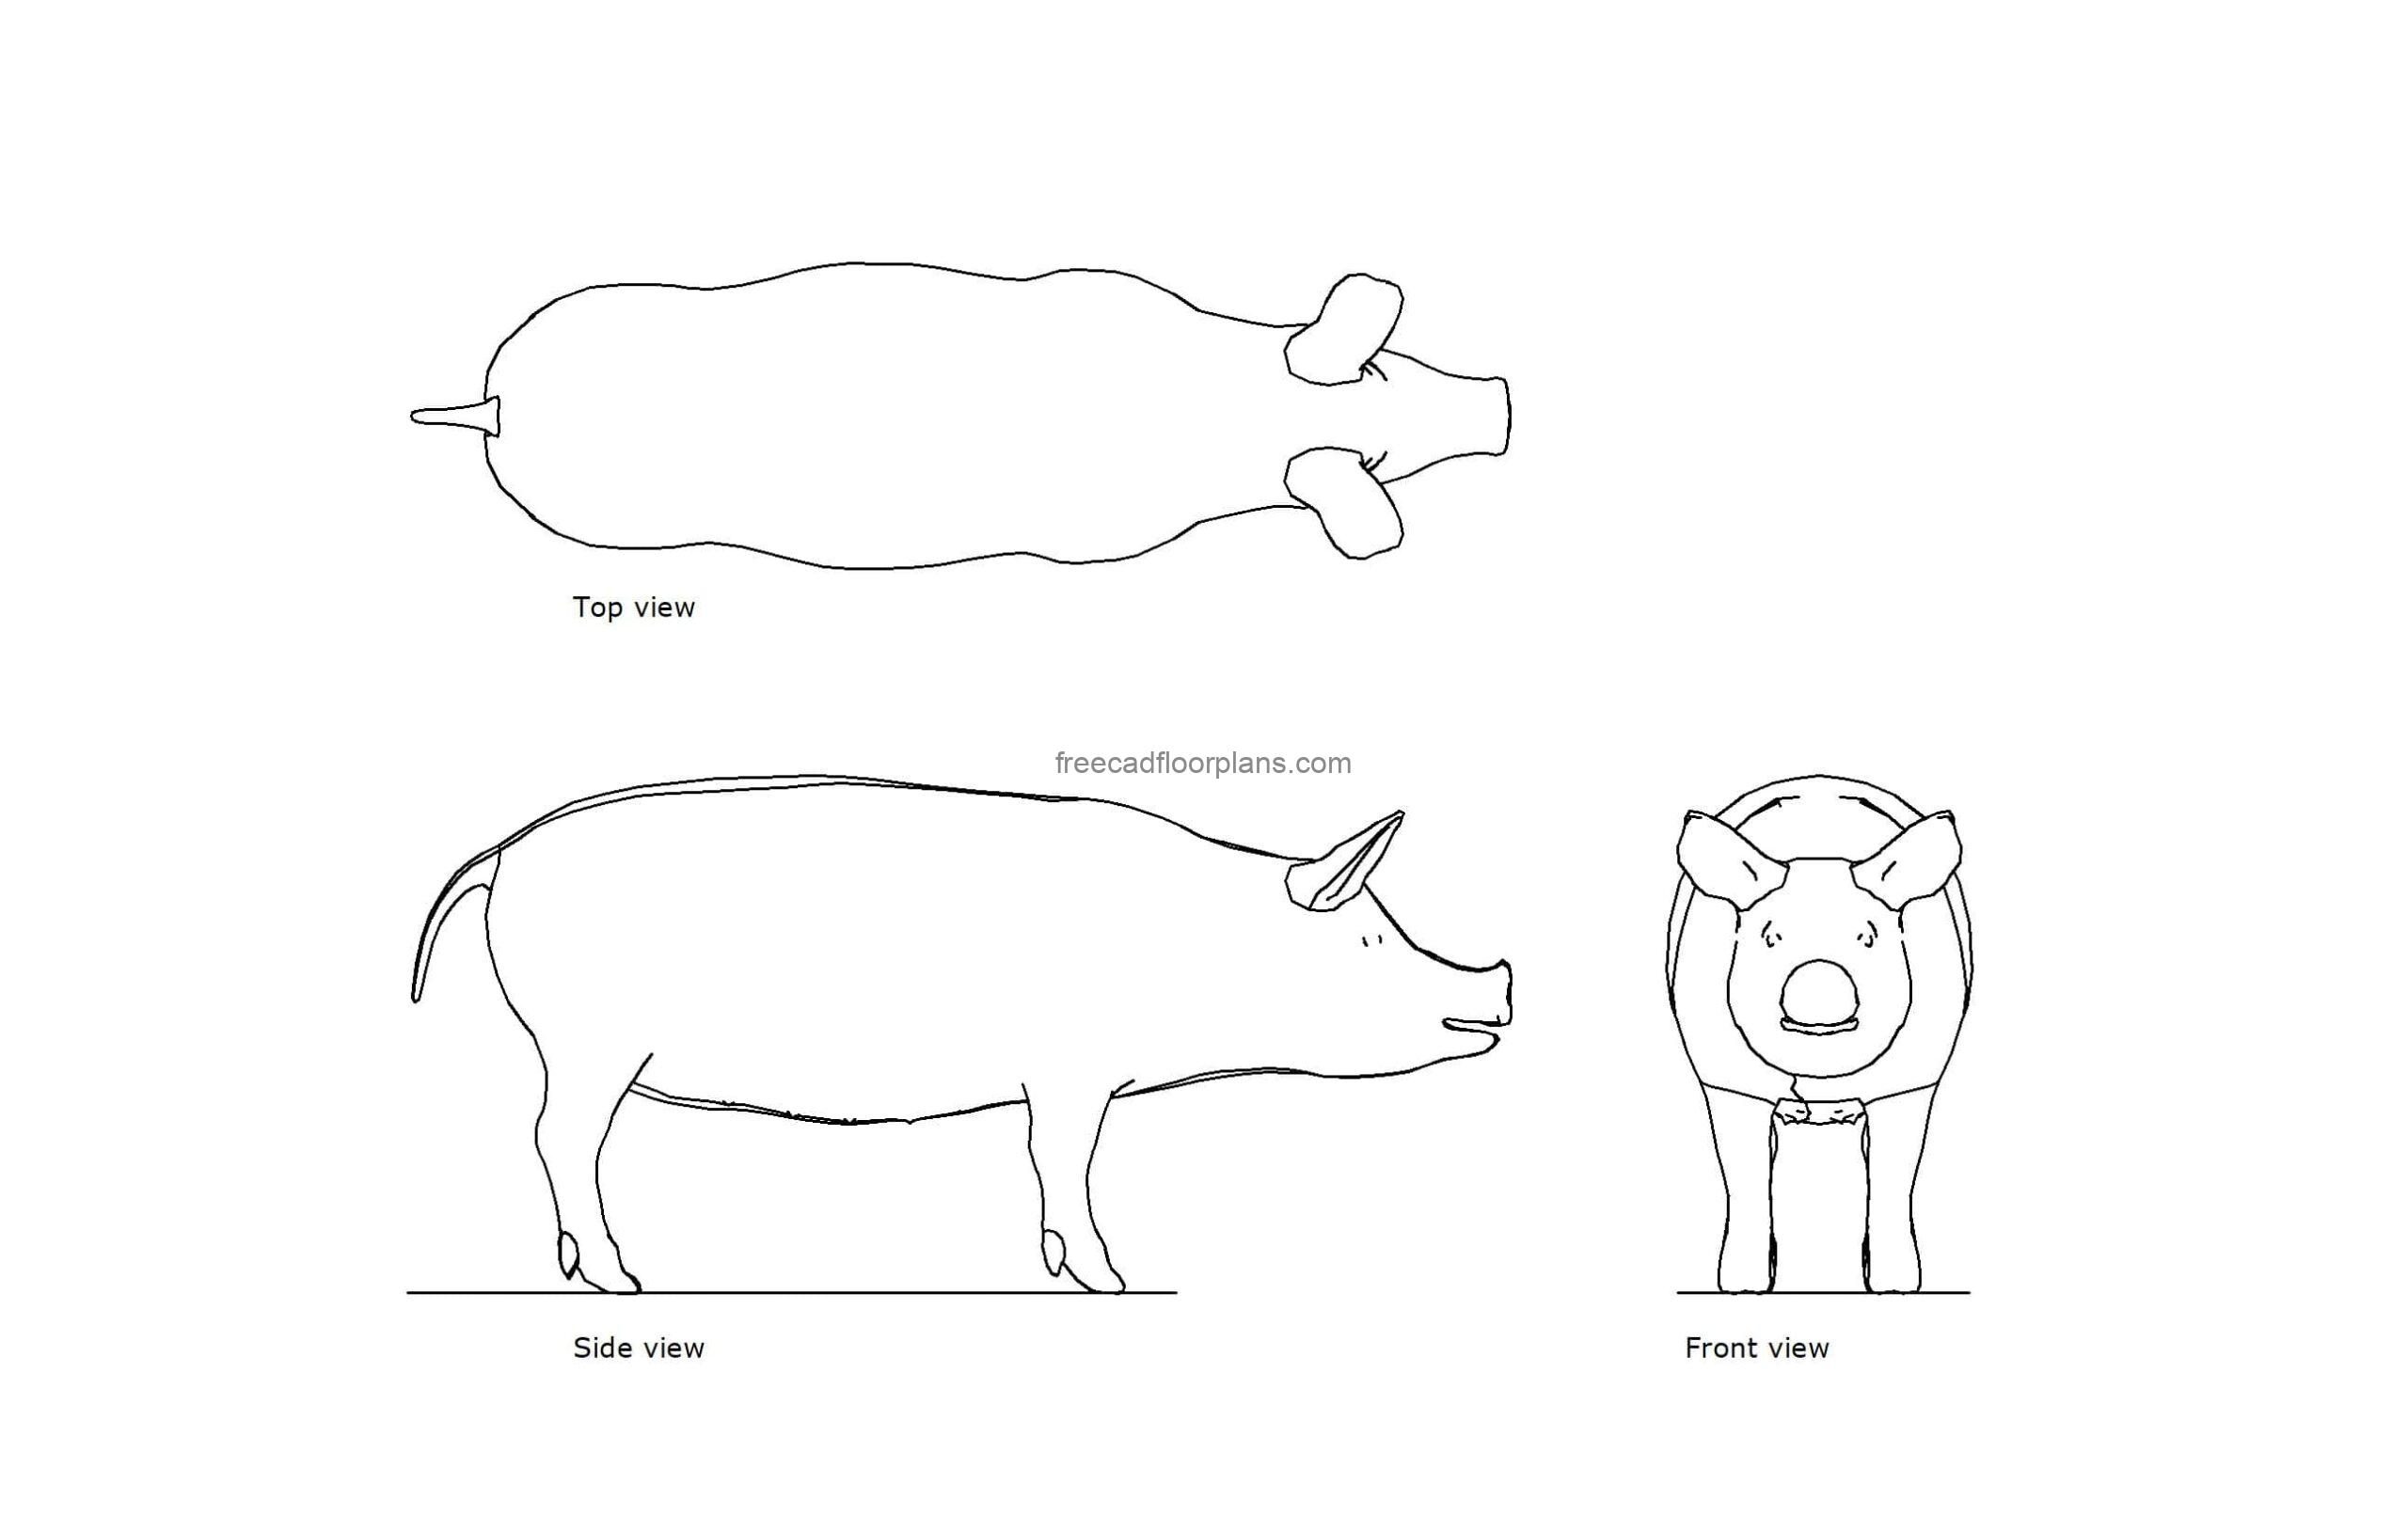 autocad drawing of a pig plan and elevation 2d views, dwg file free for download